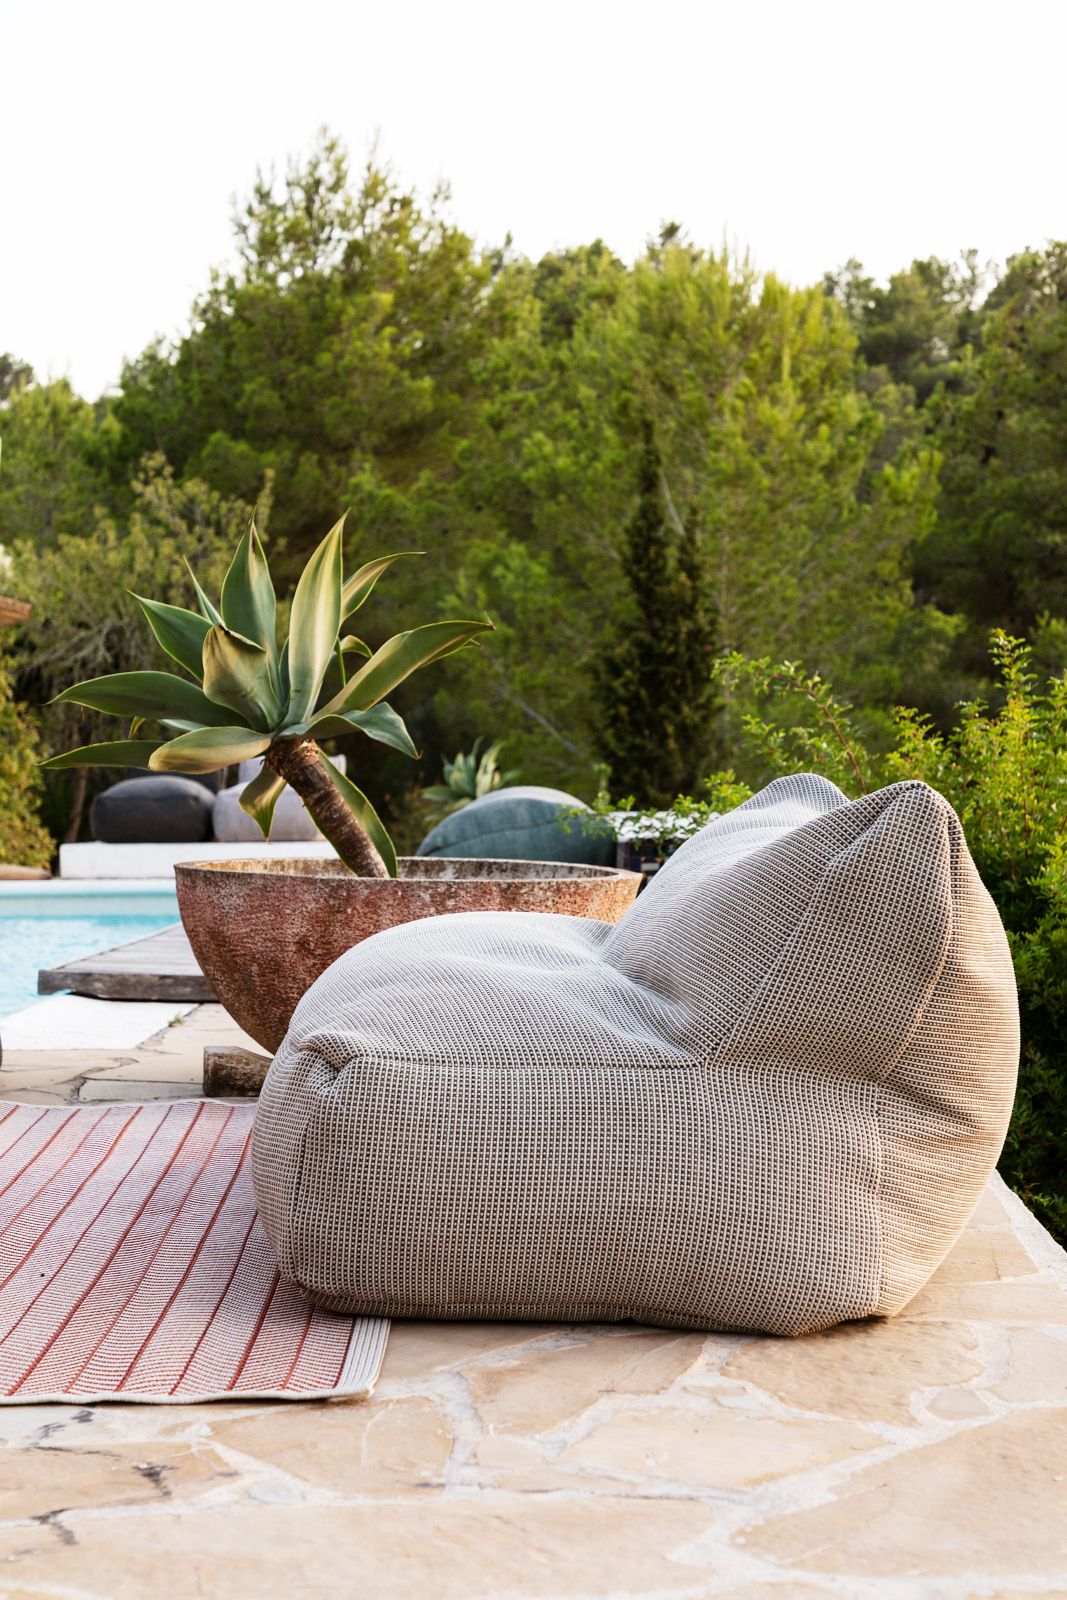 Outdoor Furniture Design Ideas To Try